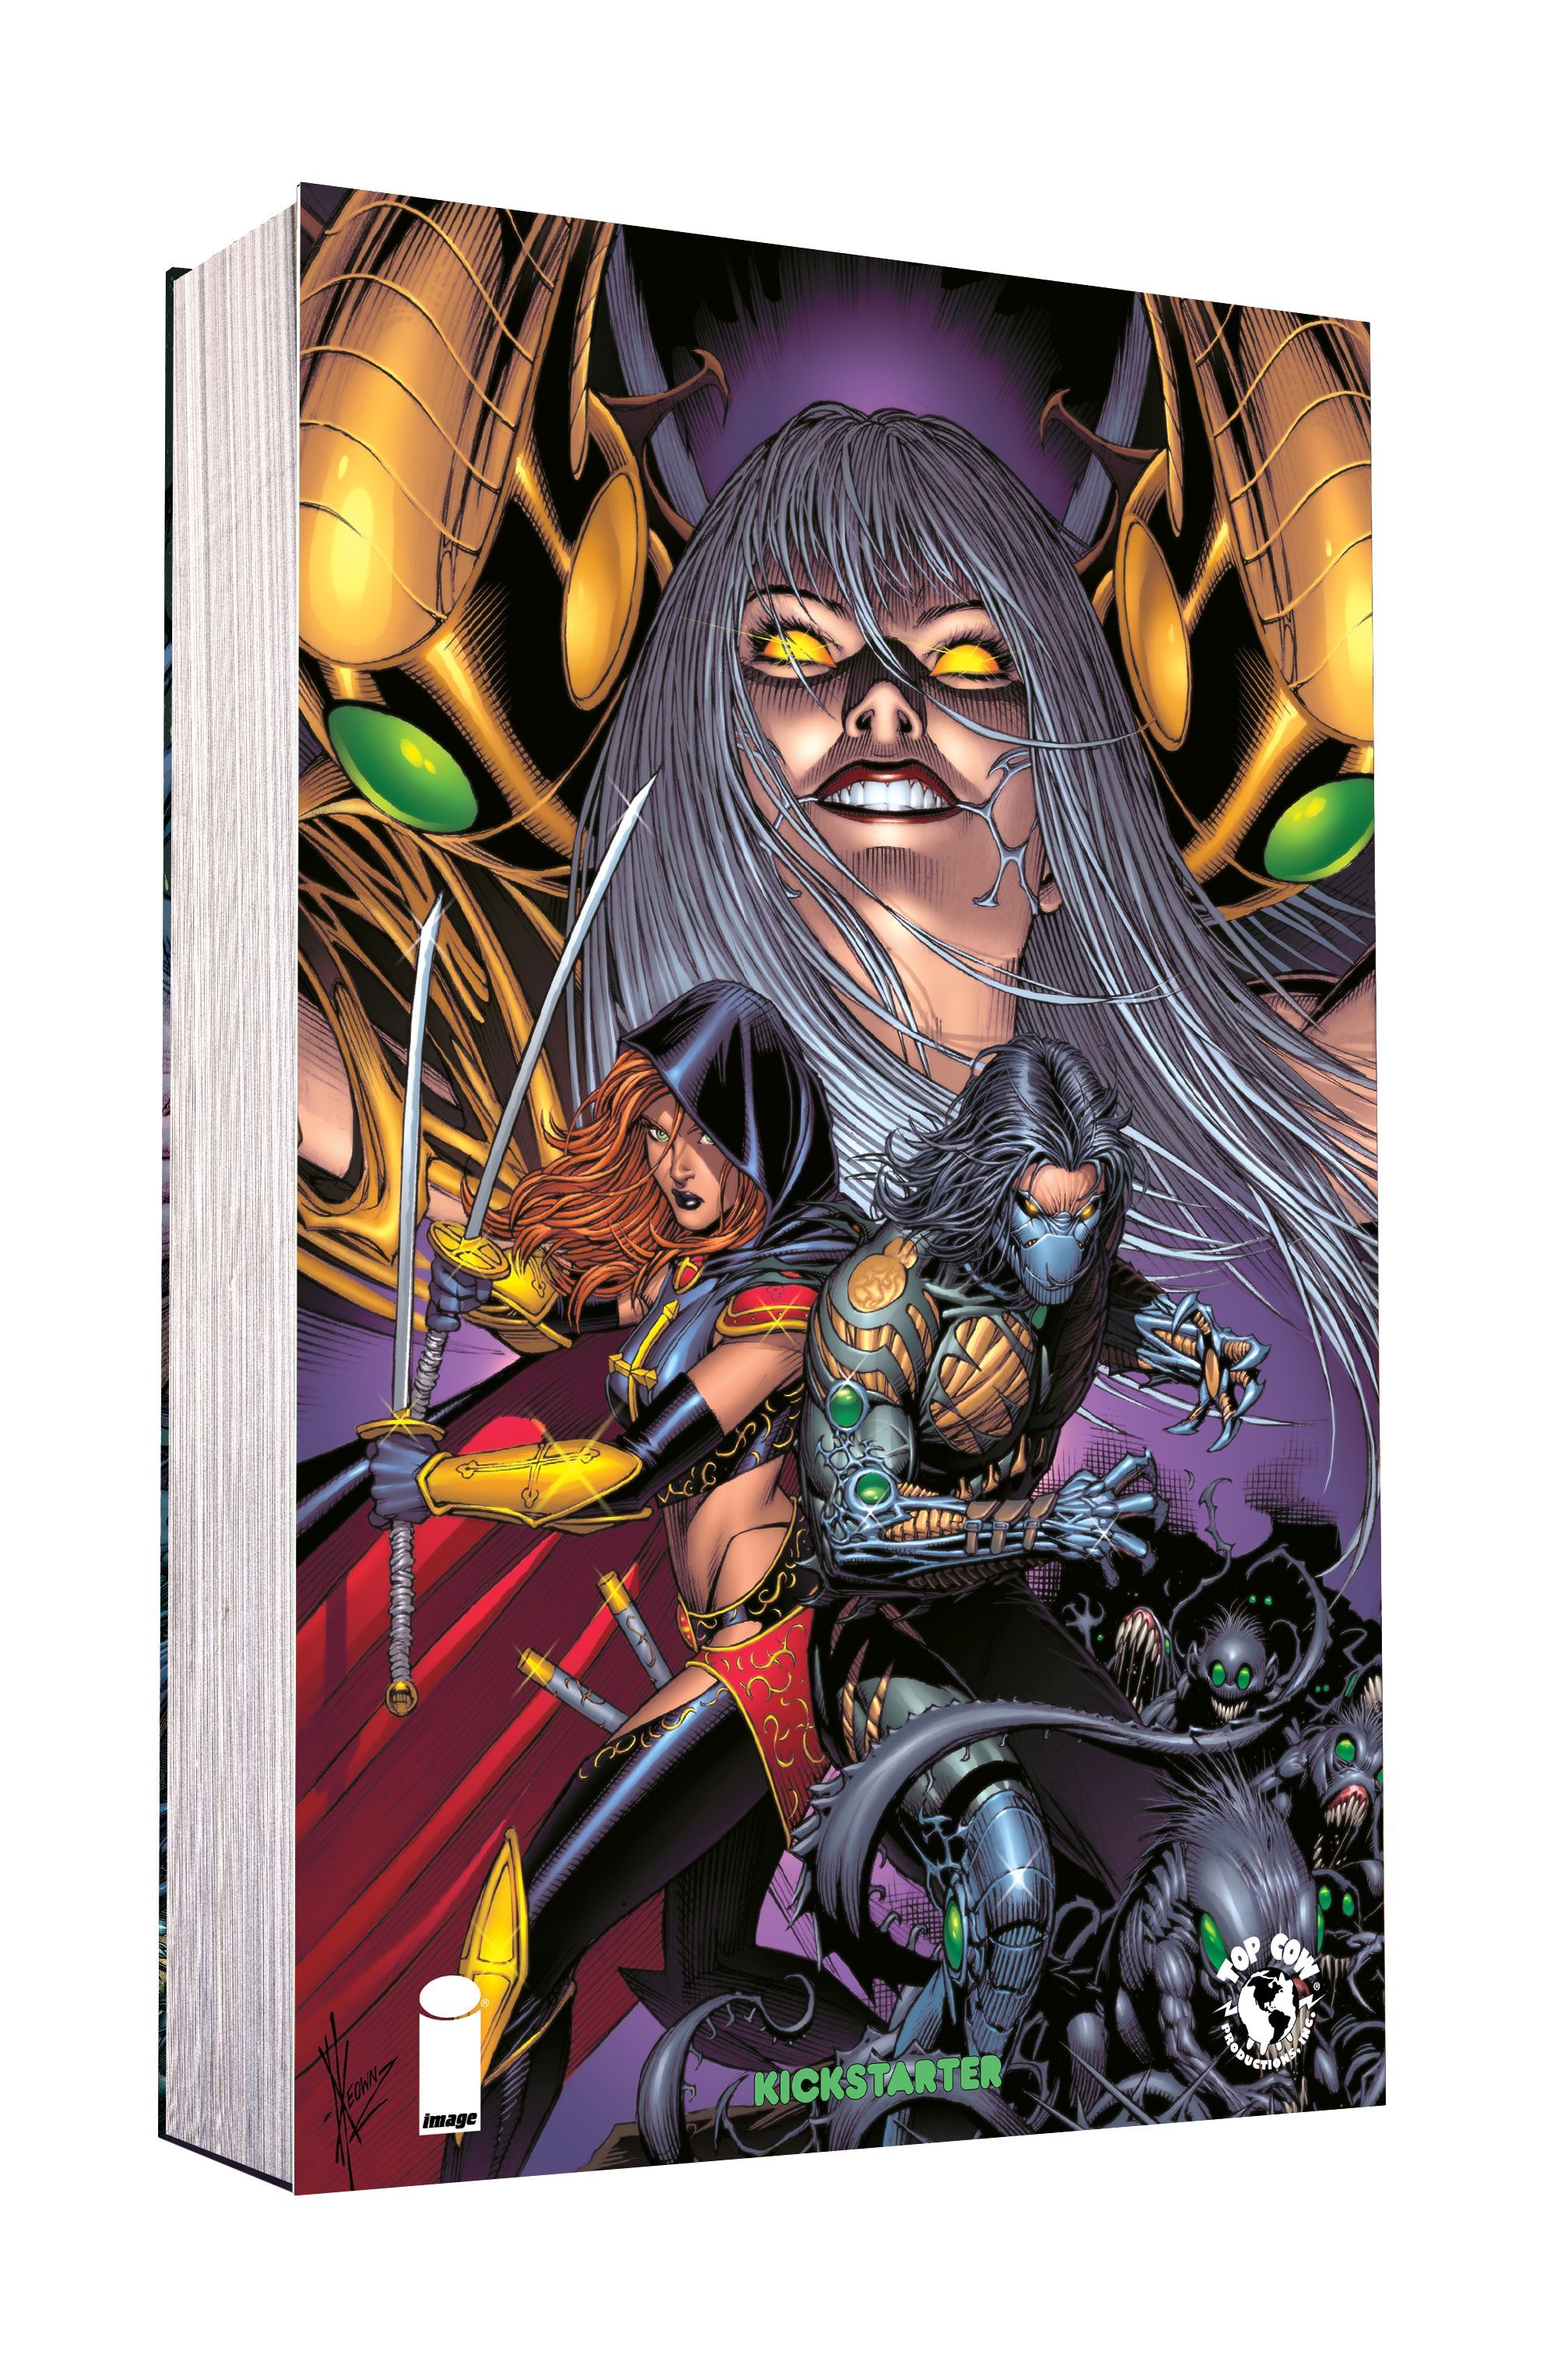 Darkness Complete Collection Volume 3 Back Cover: two costumed heroes with swords and metal claws stand ready to fight in front of a large figure with white hair.